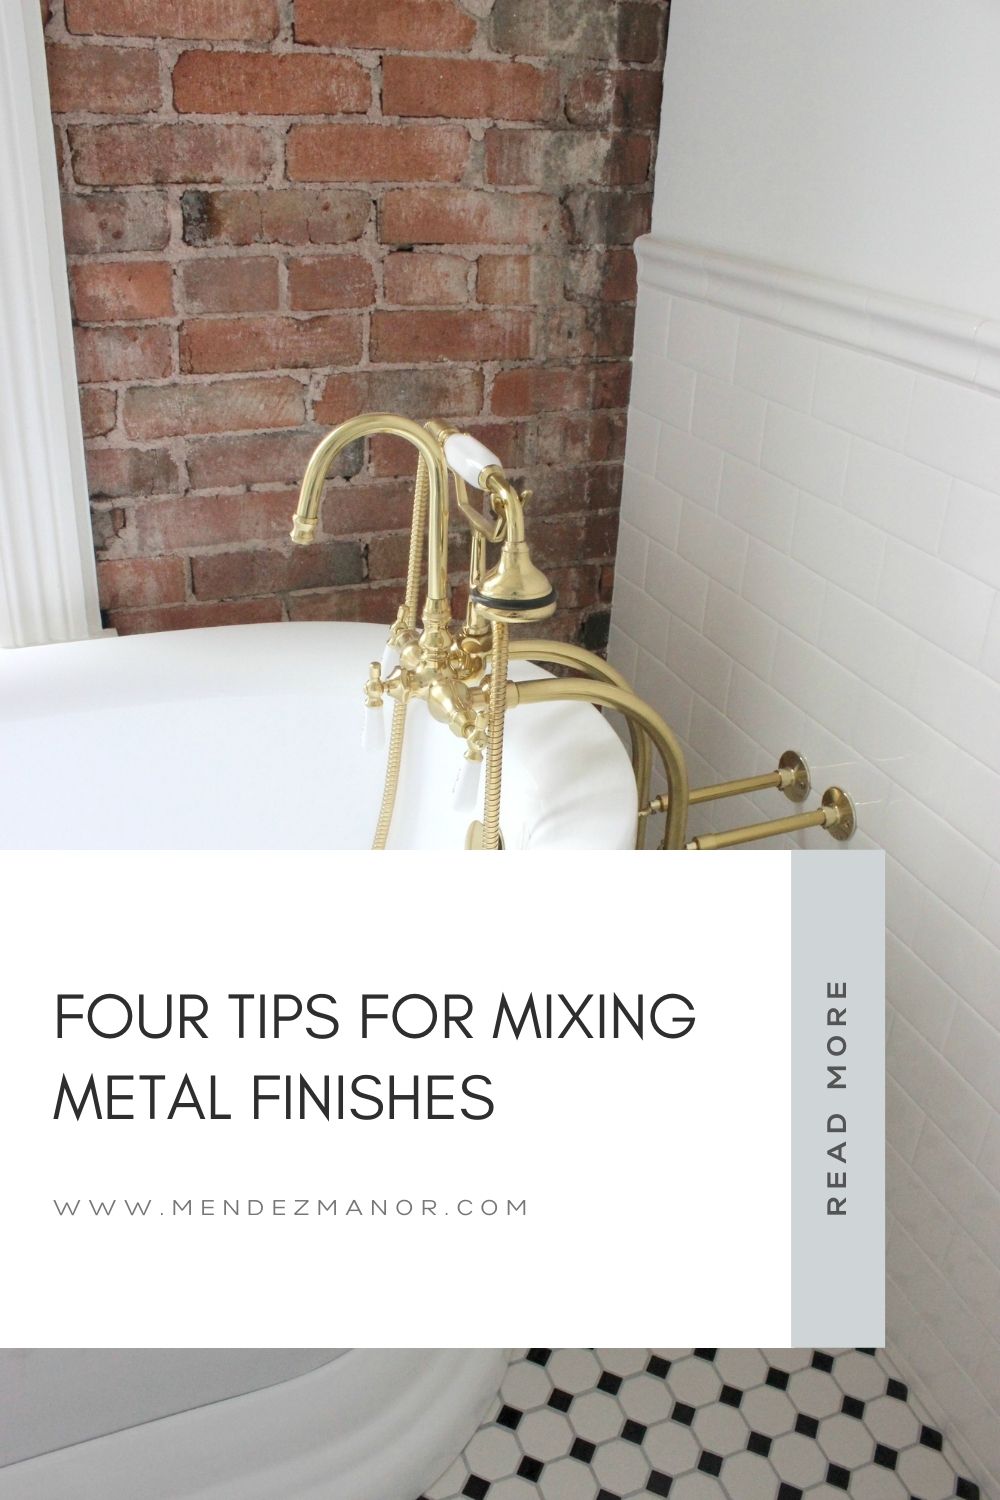 How To Mix Metal Finishes In Your Home - Four Tips For A Cohesive Look